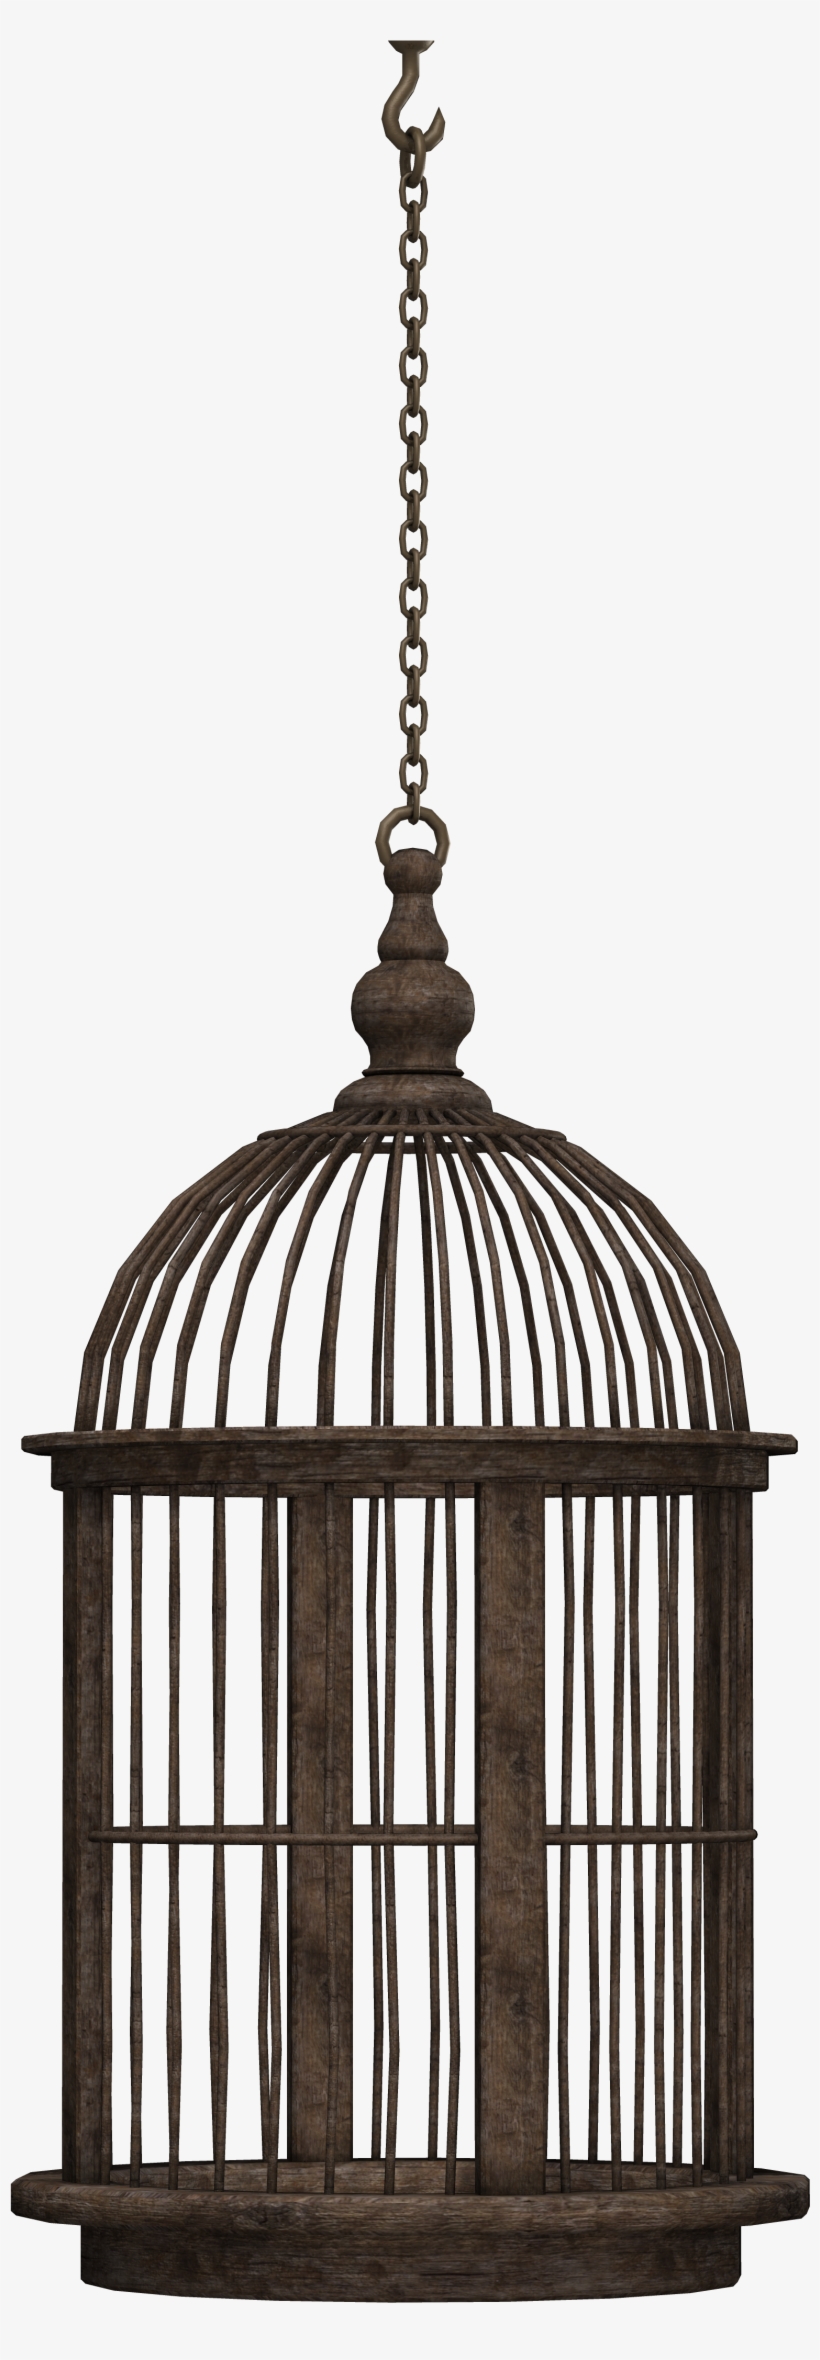 Bird Cage On A Chain - Bird Cage Silhouette Png, transparent png #9259068